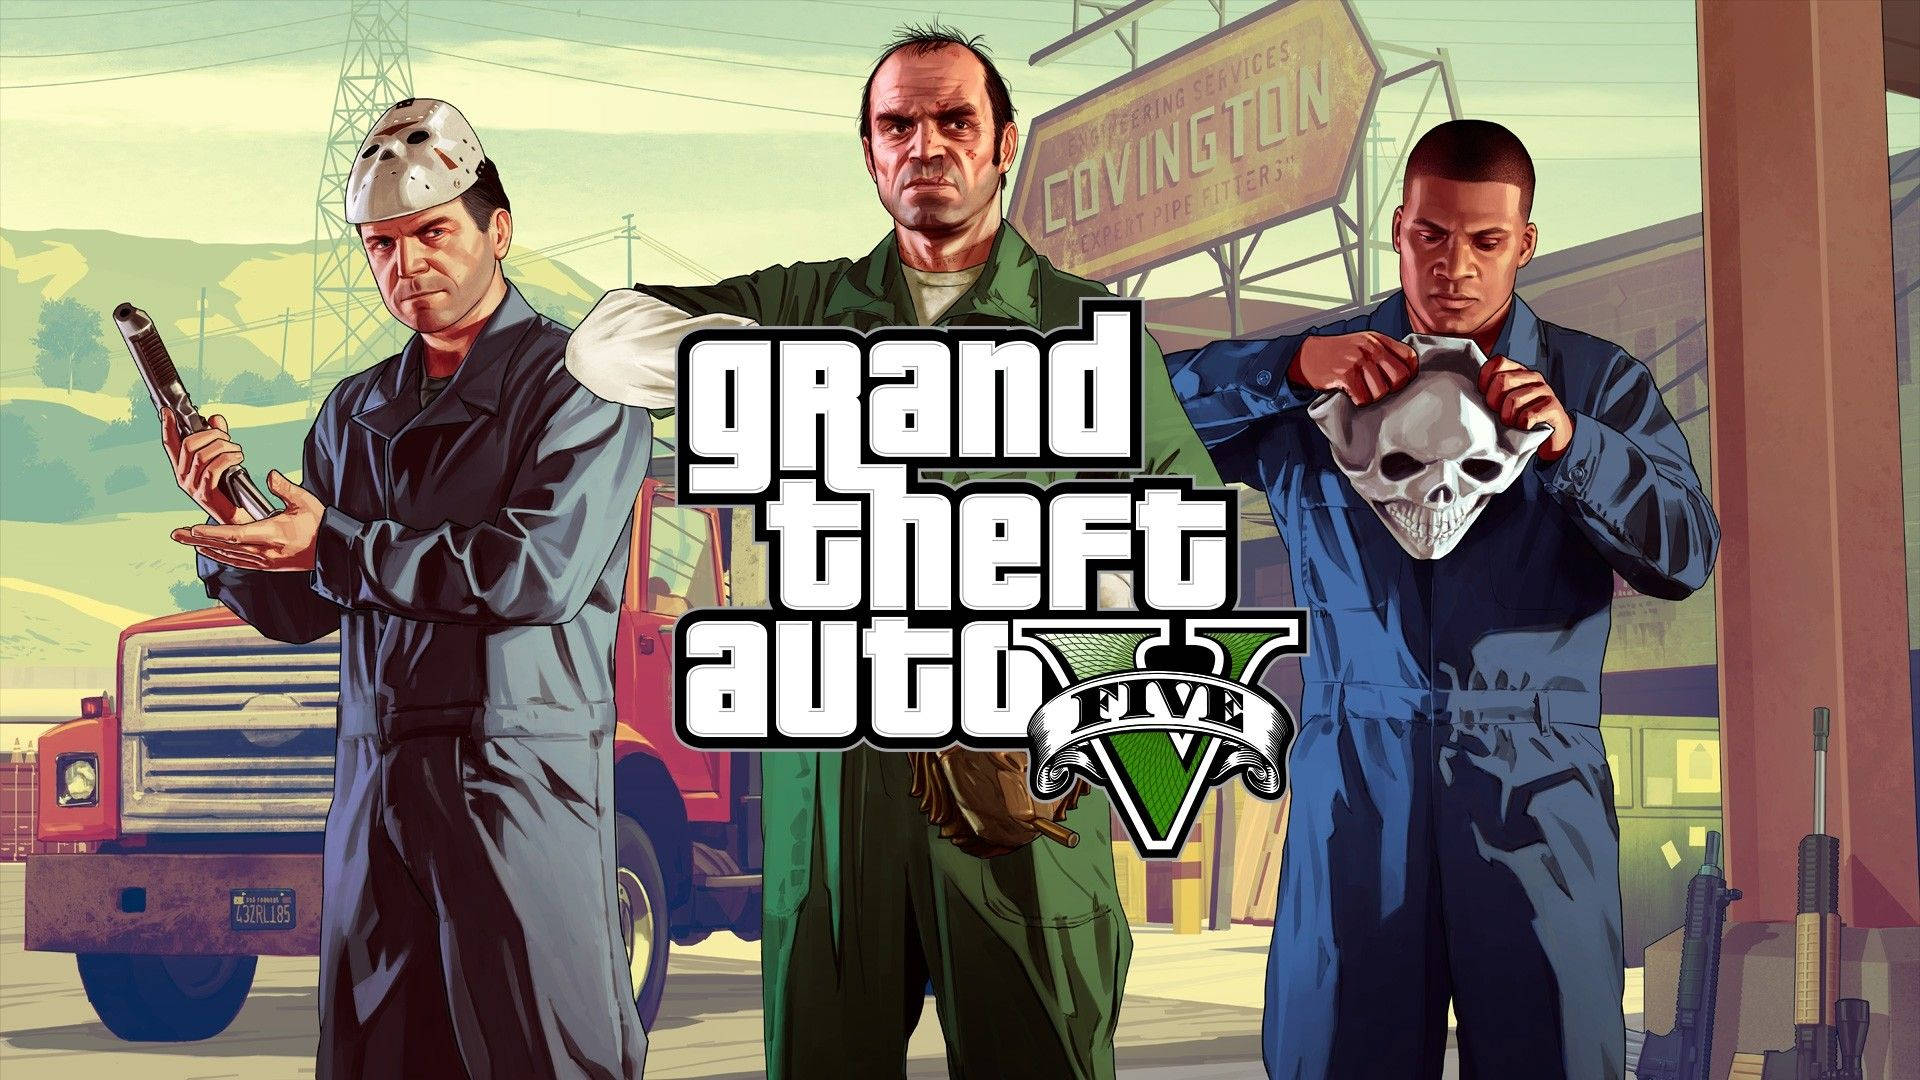 Live the life of a criminal in Grand Theft Auto 5! Wallpaper